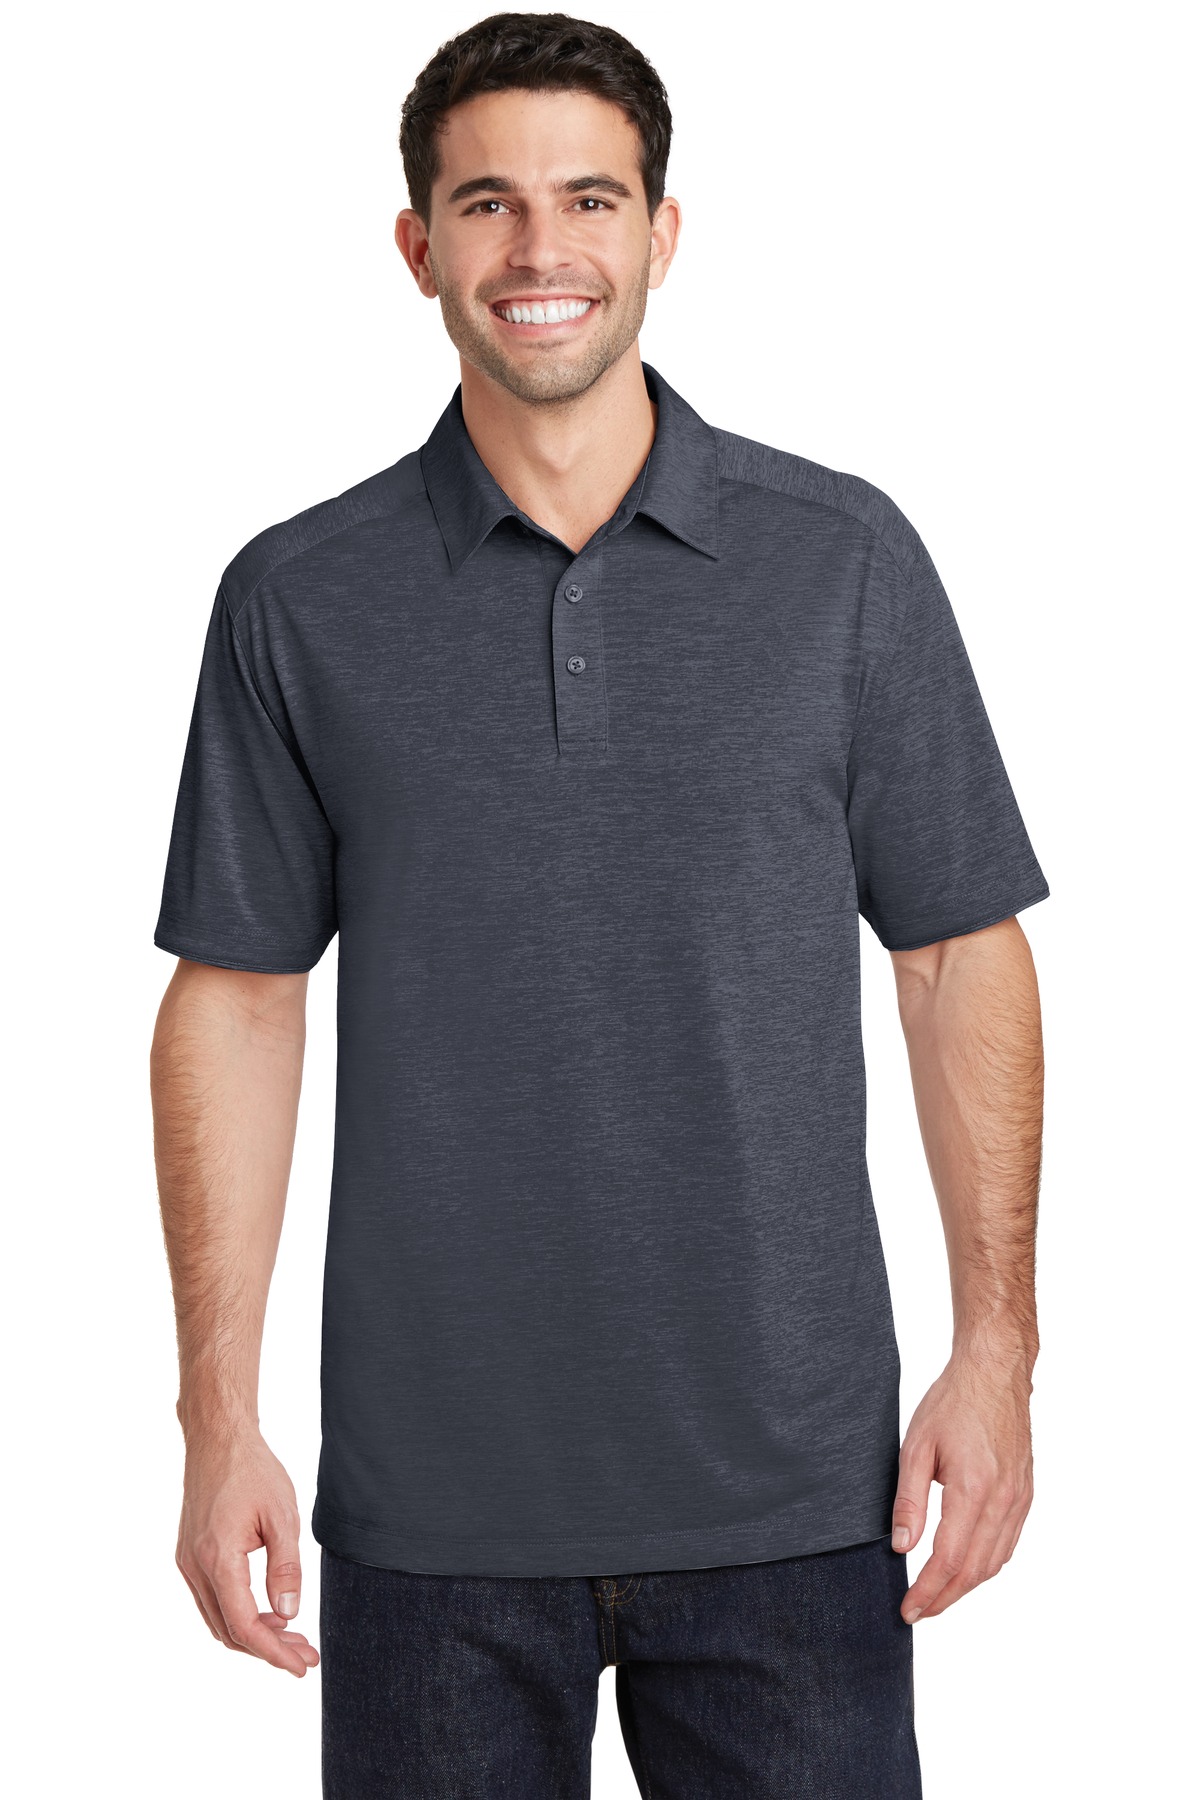 Front view of Digi Heather Performance Polo